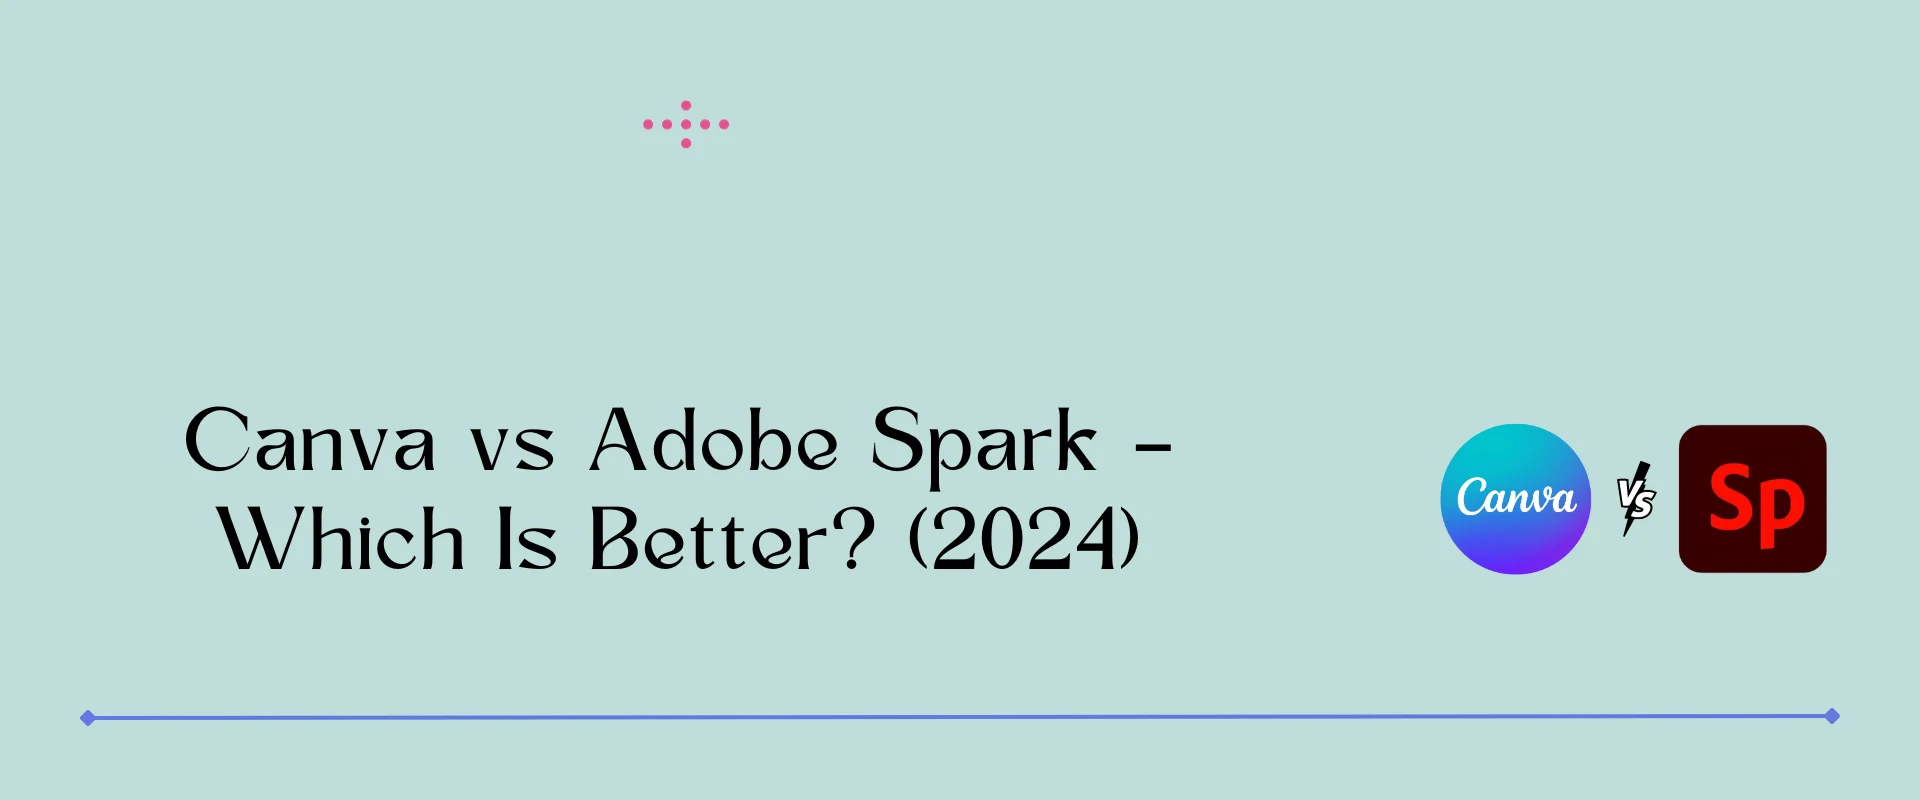 Canva vs Adobe Spark – Which Is Better? (2024)